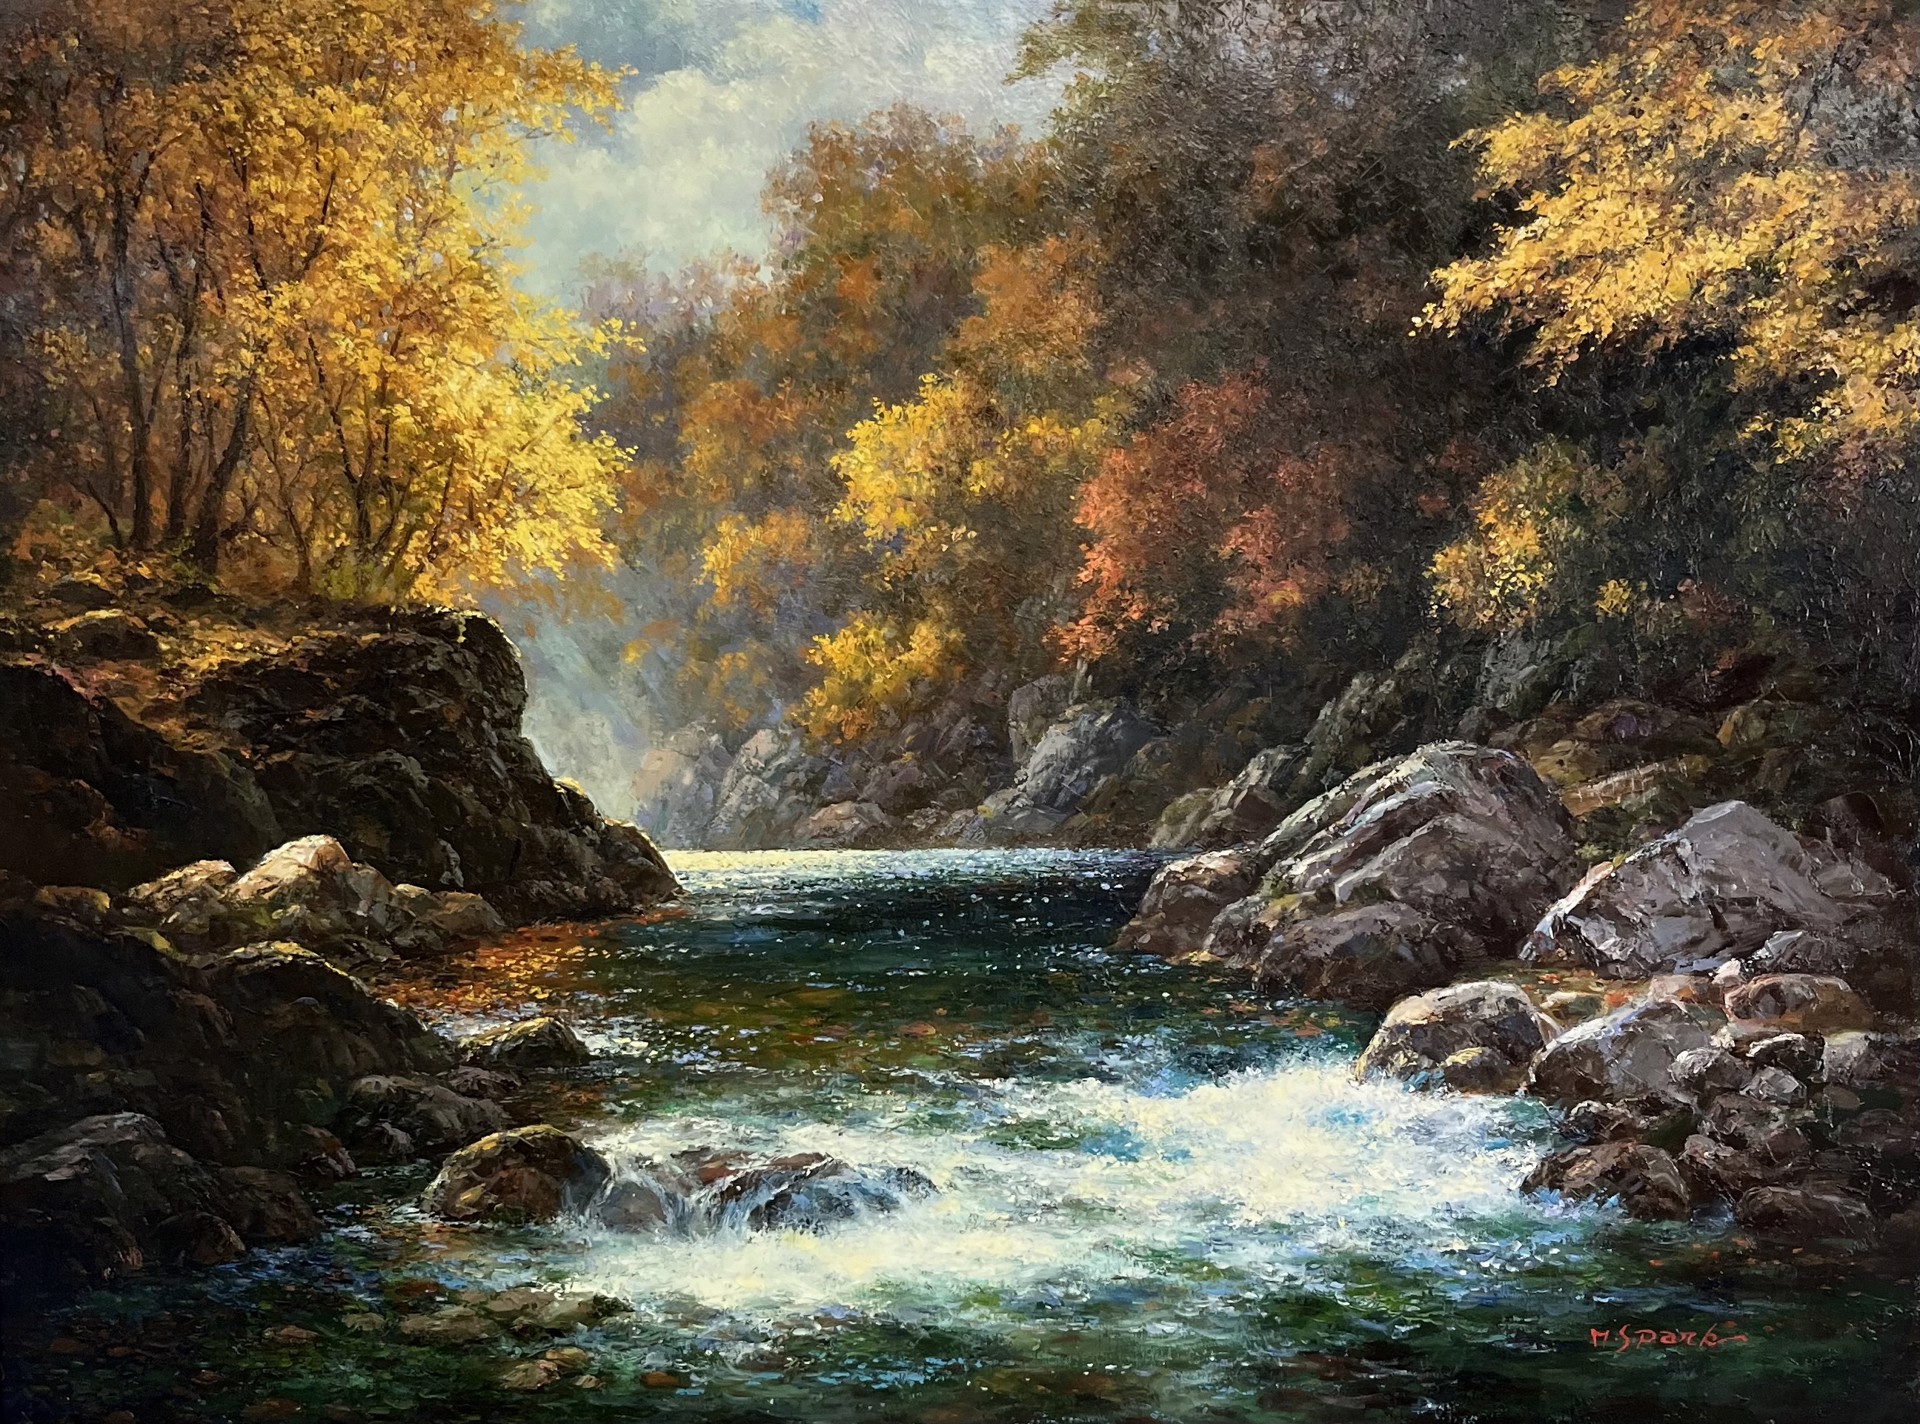 Roaring Fork by M.S. Park